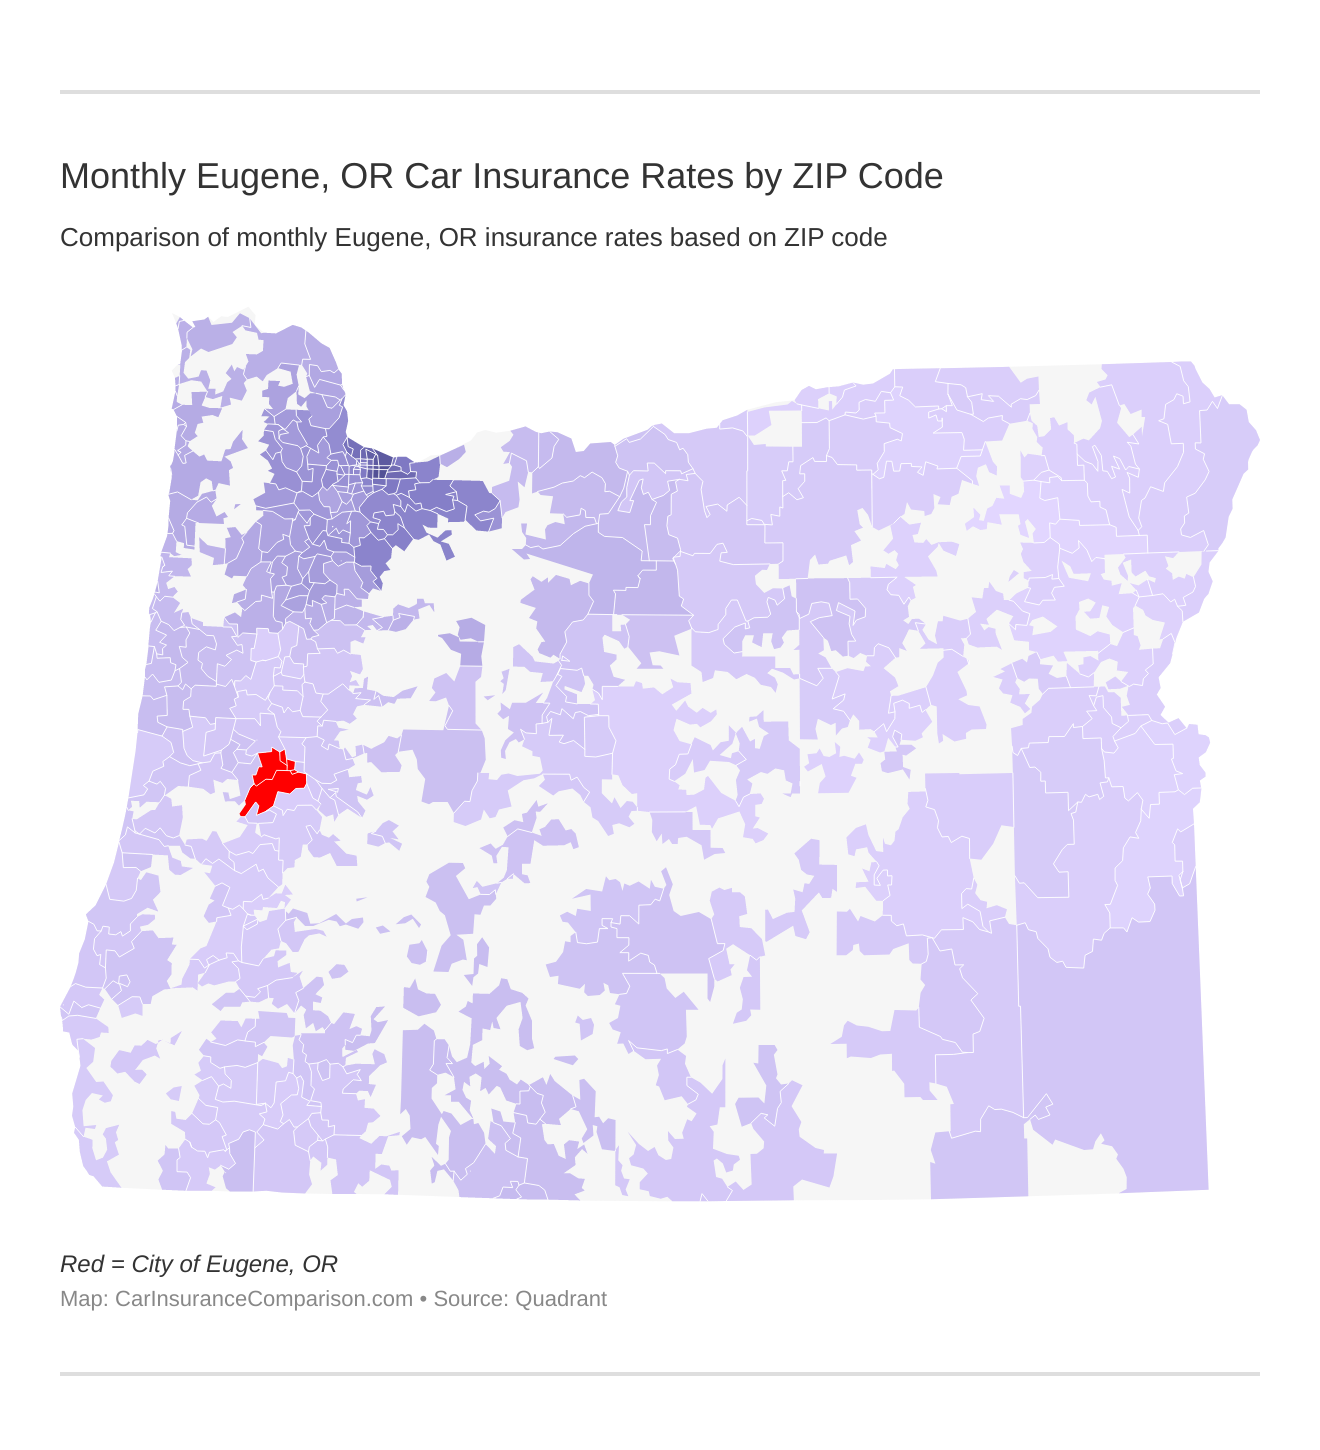 Monthly Eugene, OR Car Insurance Rates by ZIP Code